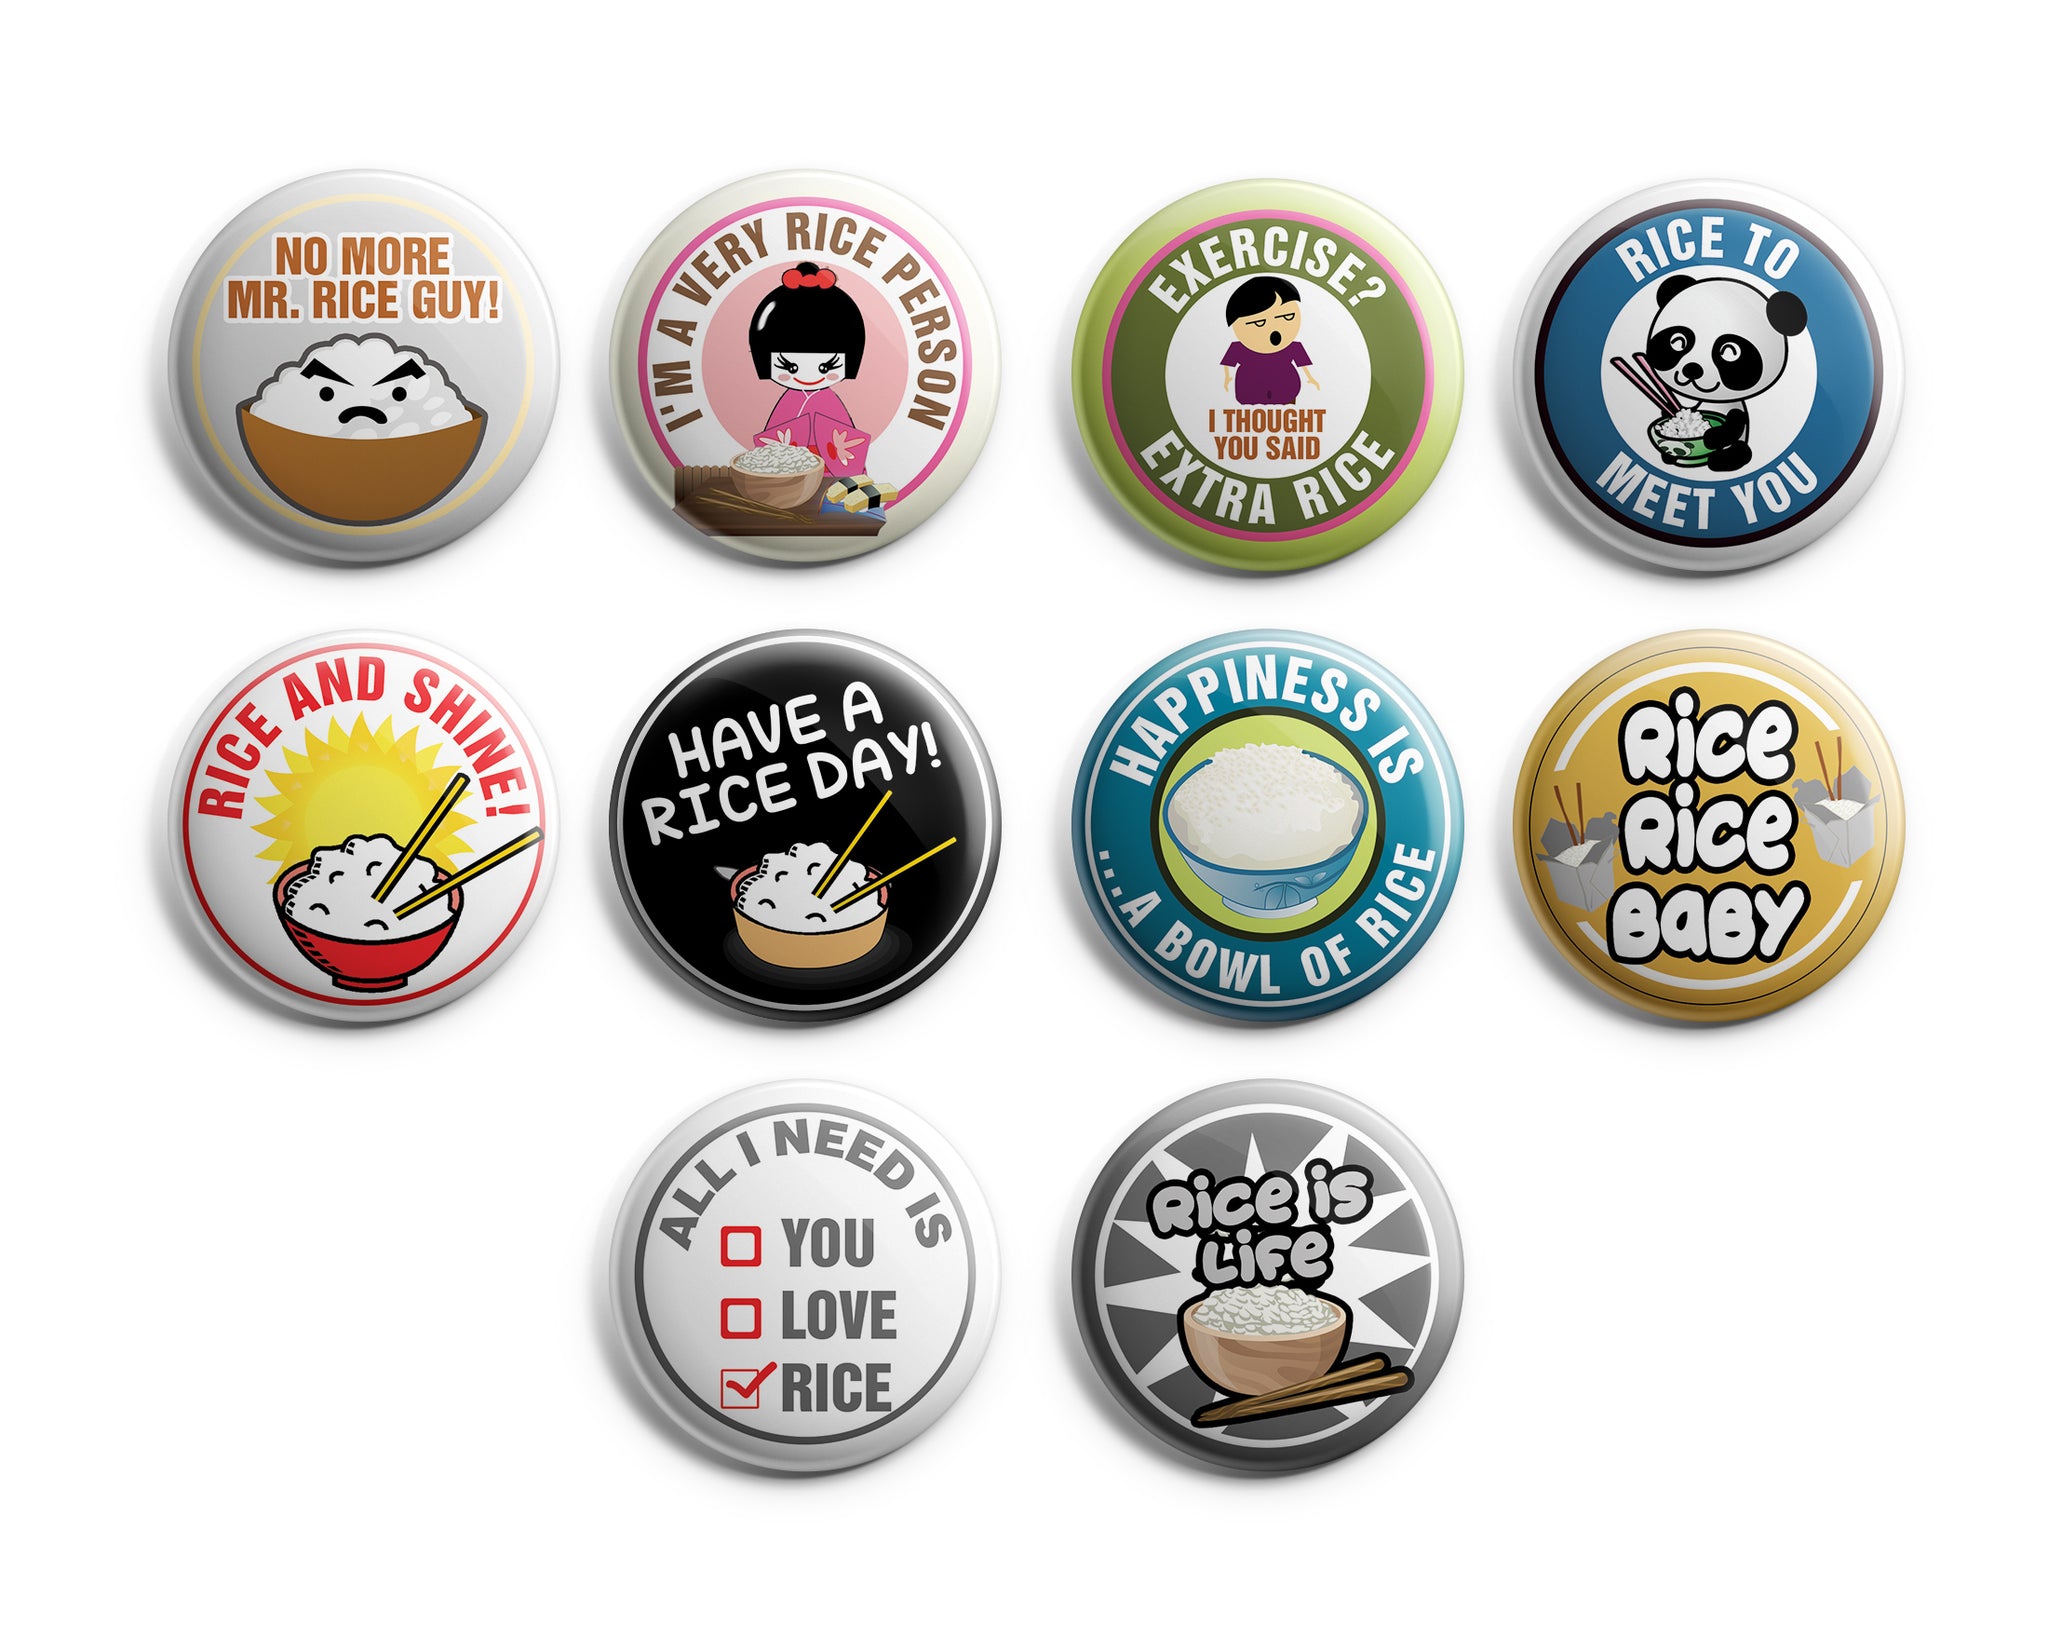 Have a RICE DAY Funny Illustration Pinback Buttons (10-Pack) - Large 2.25" Rice Lover , Boys and Girls Cute Designs Pins Badge